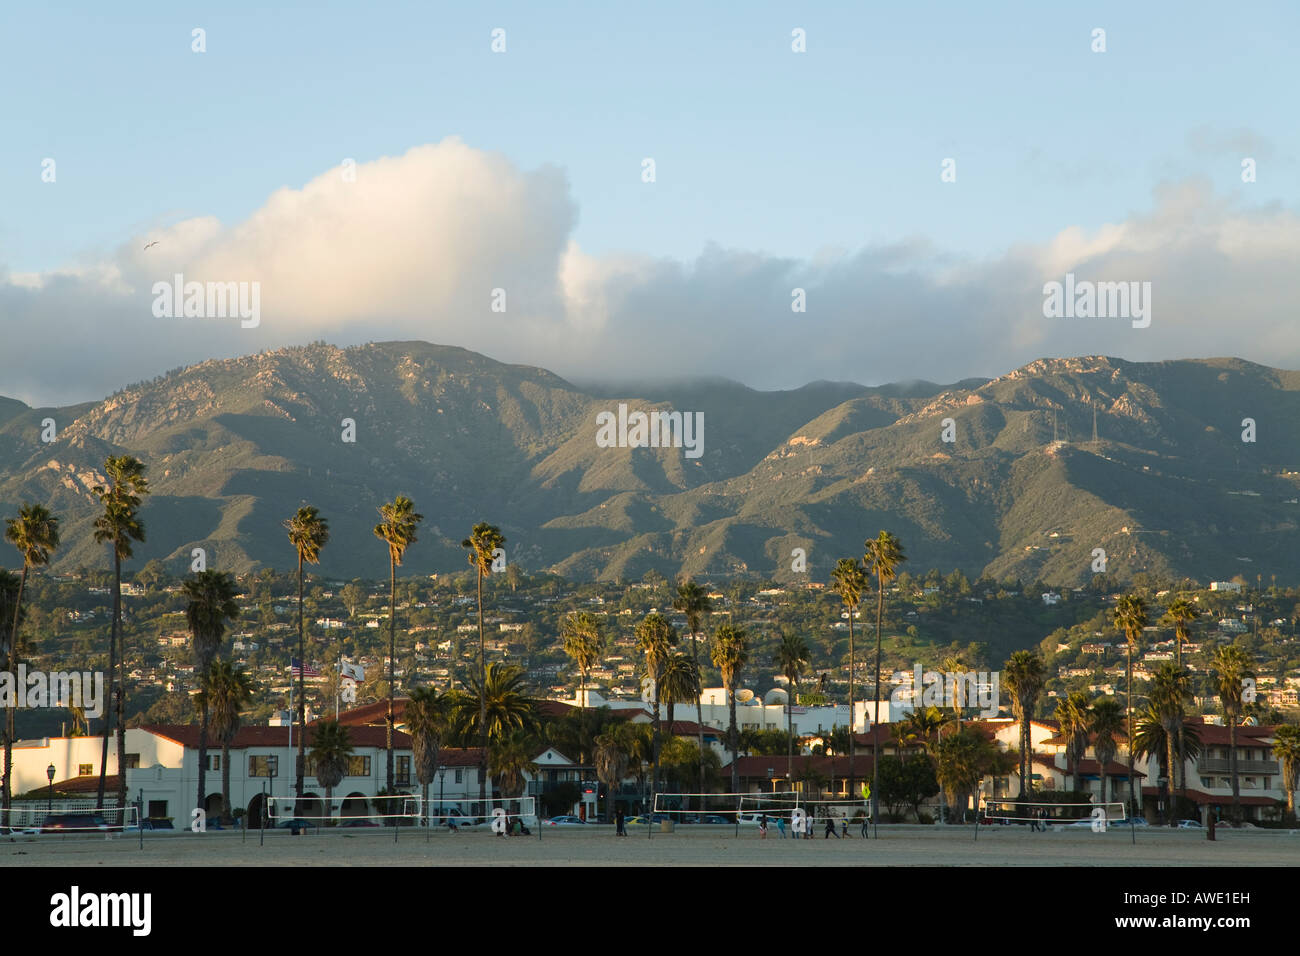 CALIFORNIA Santa Barbara Volleyball nets on West Beach hotels and palm trees Cabrillo Boulevard city buildings mountain Stock Photo